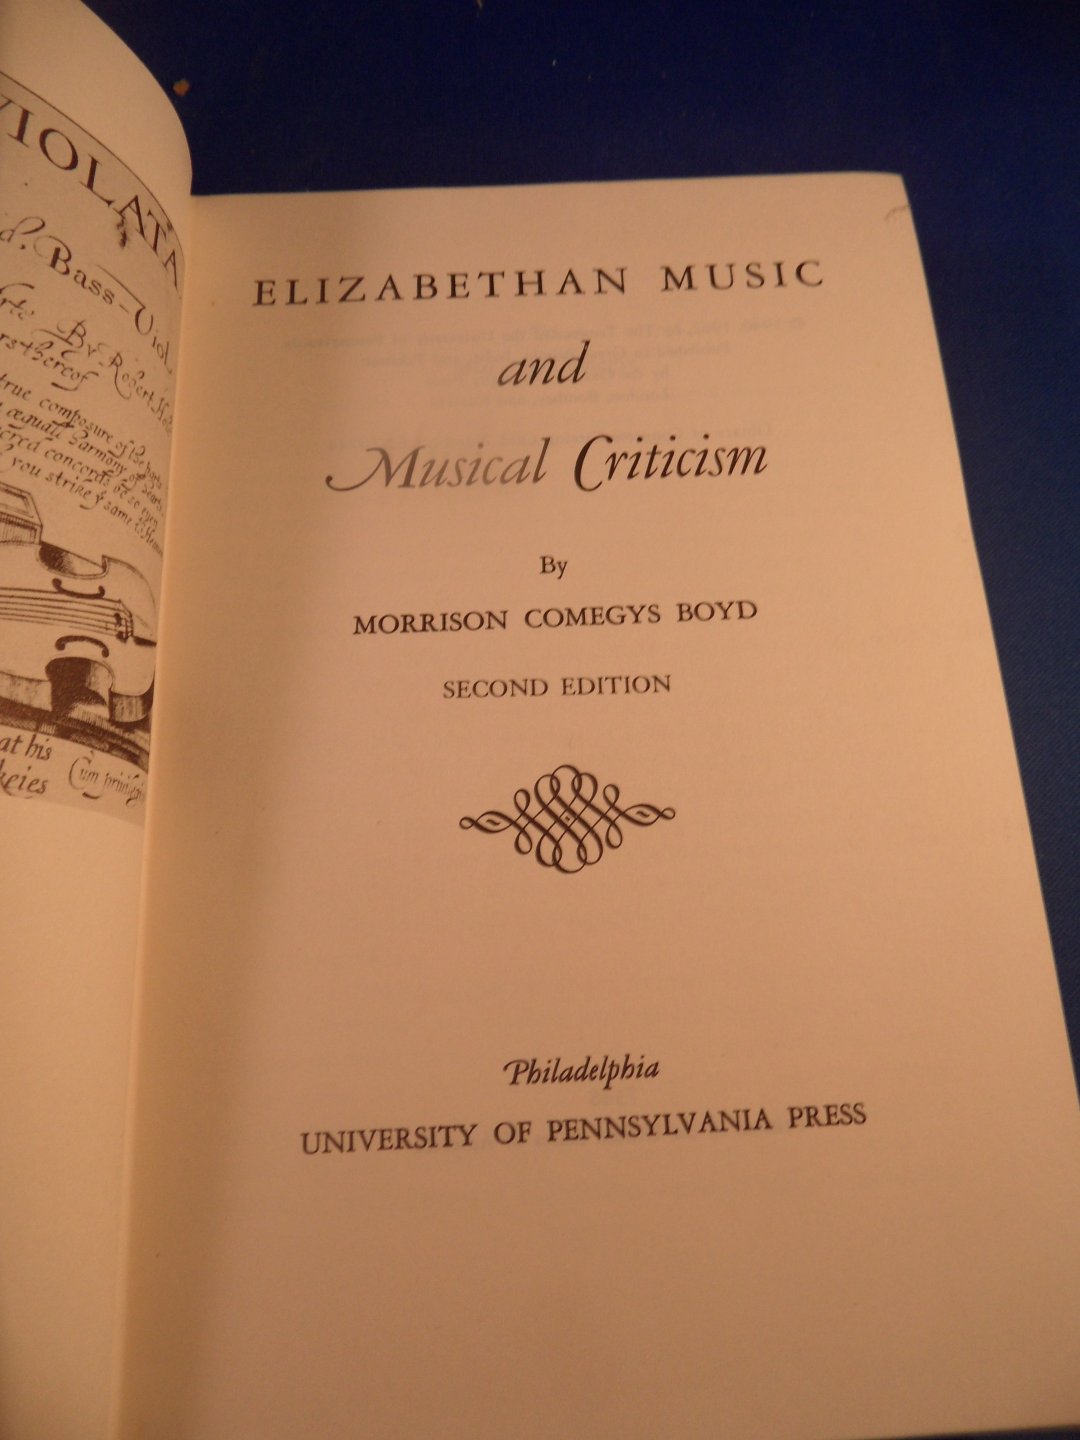 Boyd, Morrison Comegys - Elizabethan Music and Musical Criticism.